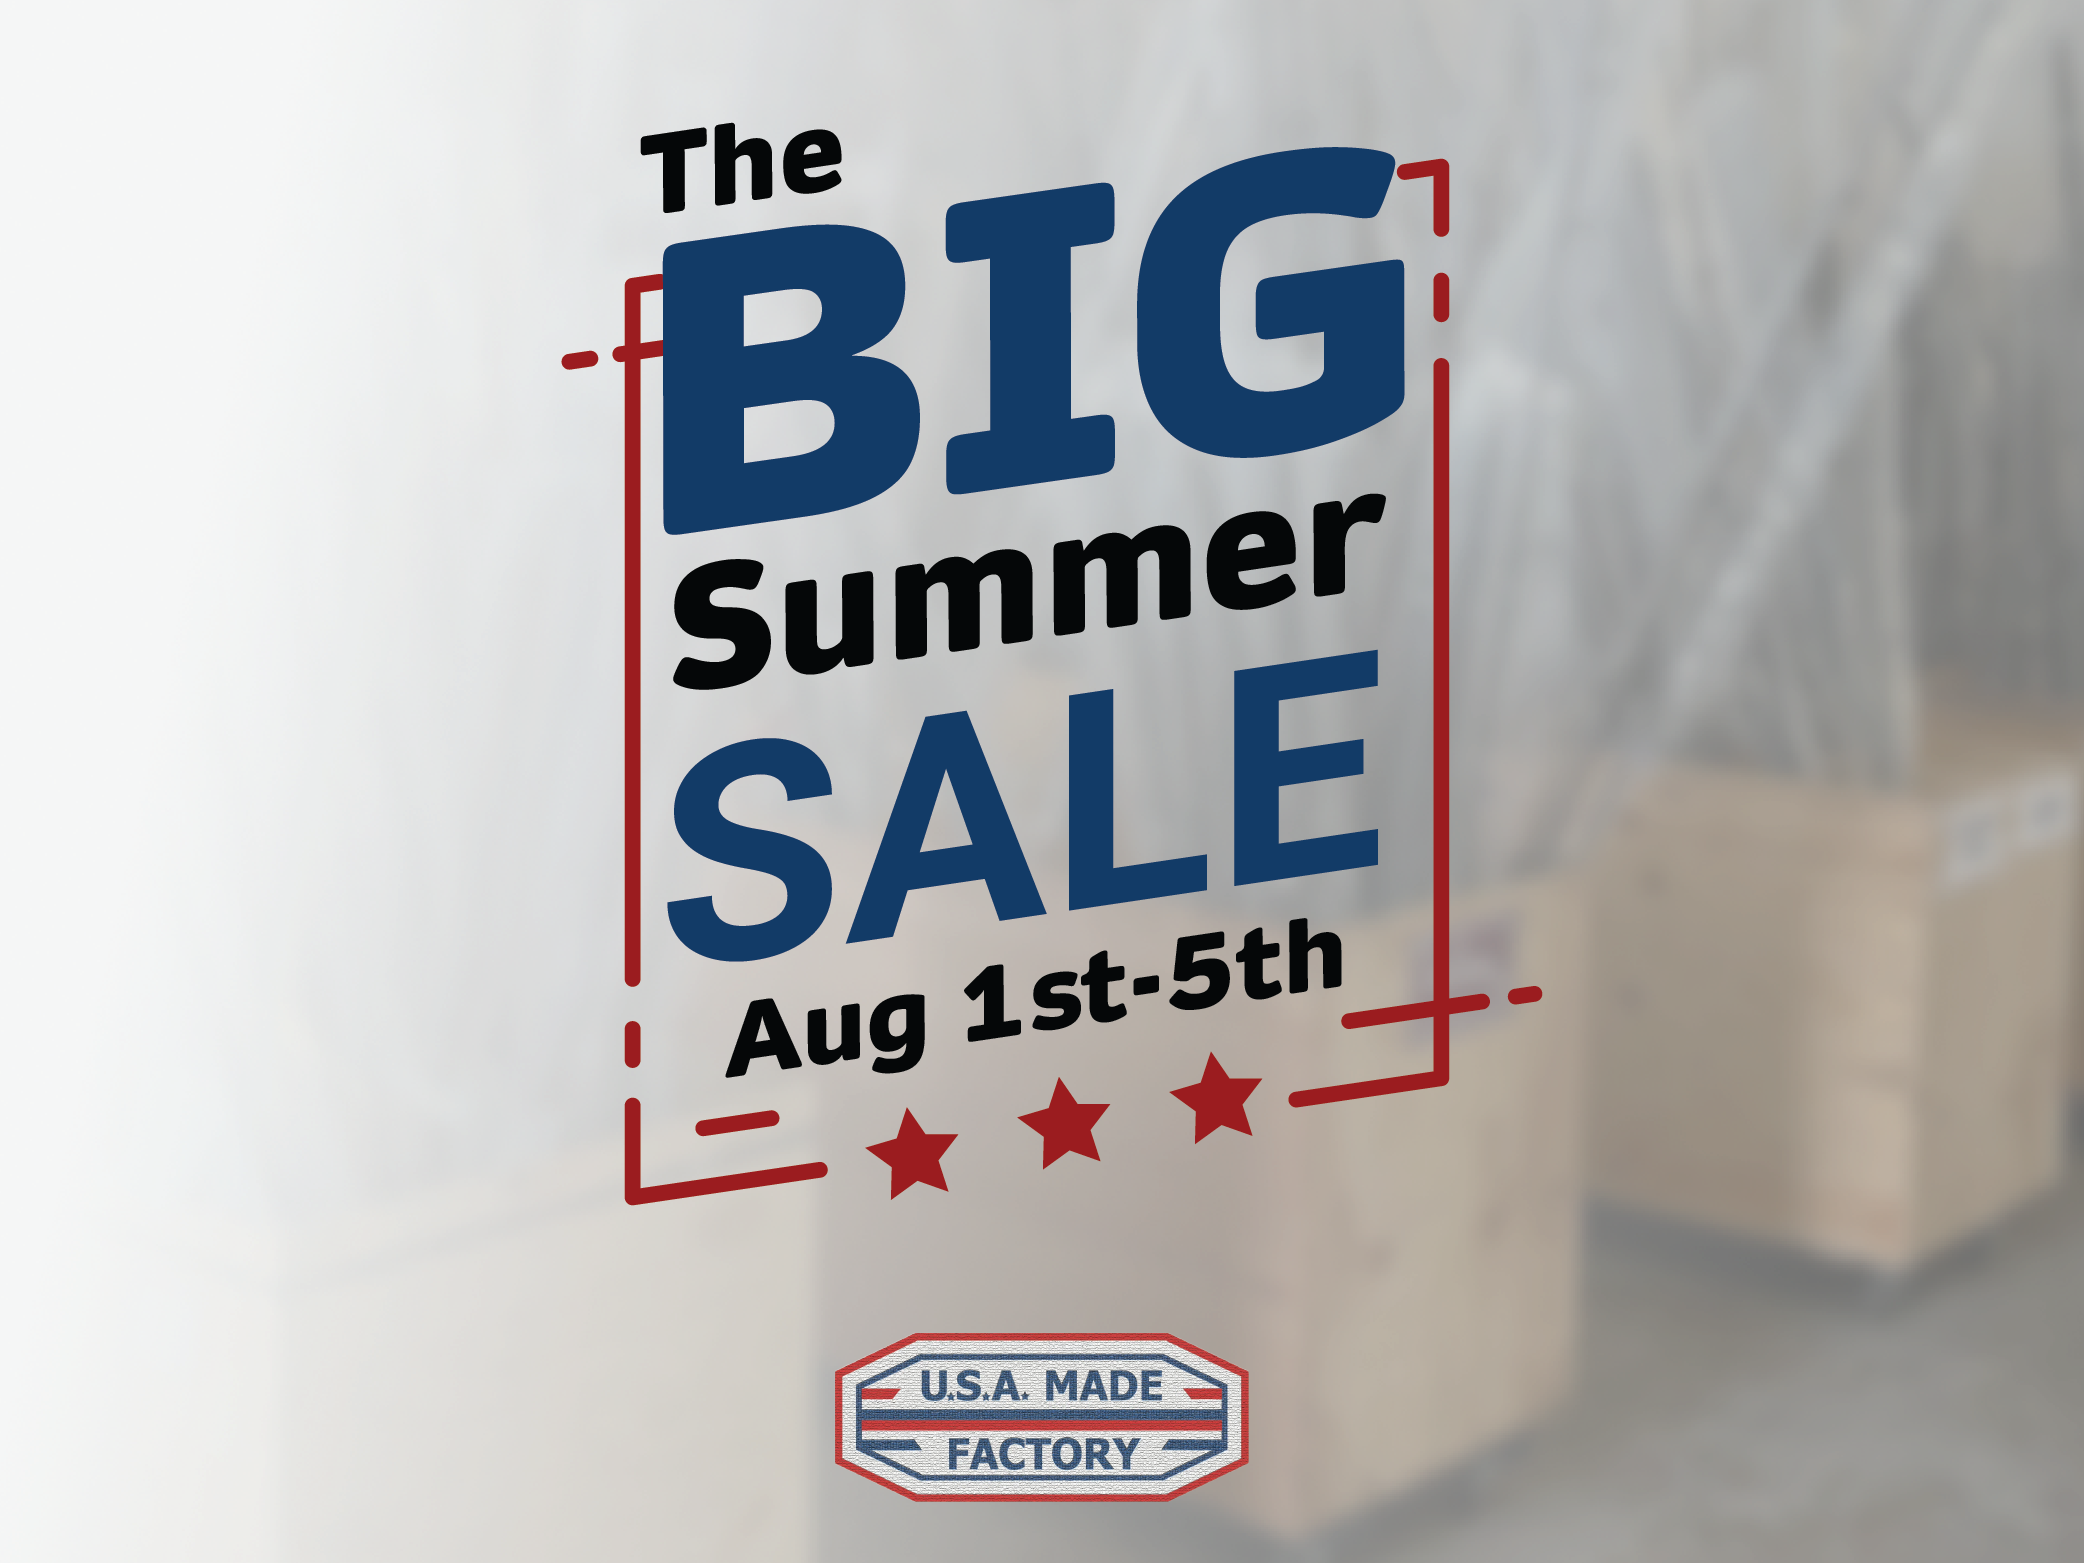 The Big Summer Sale! August 1st - 5th